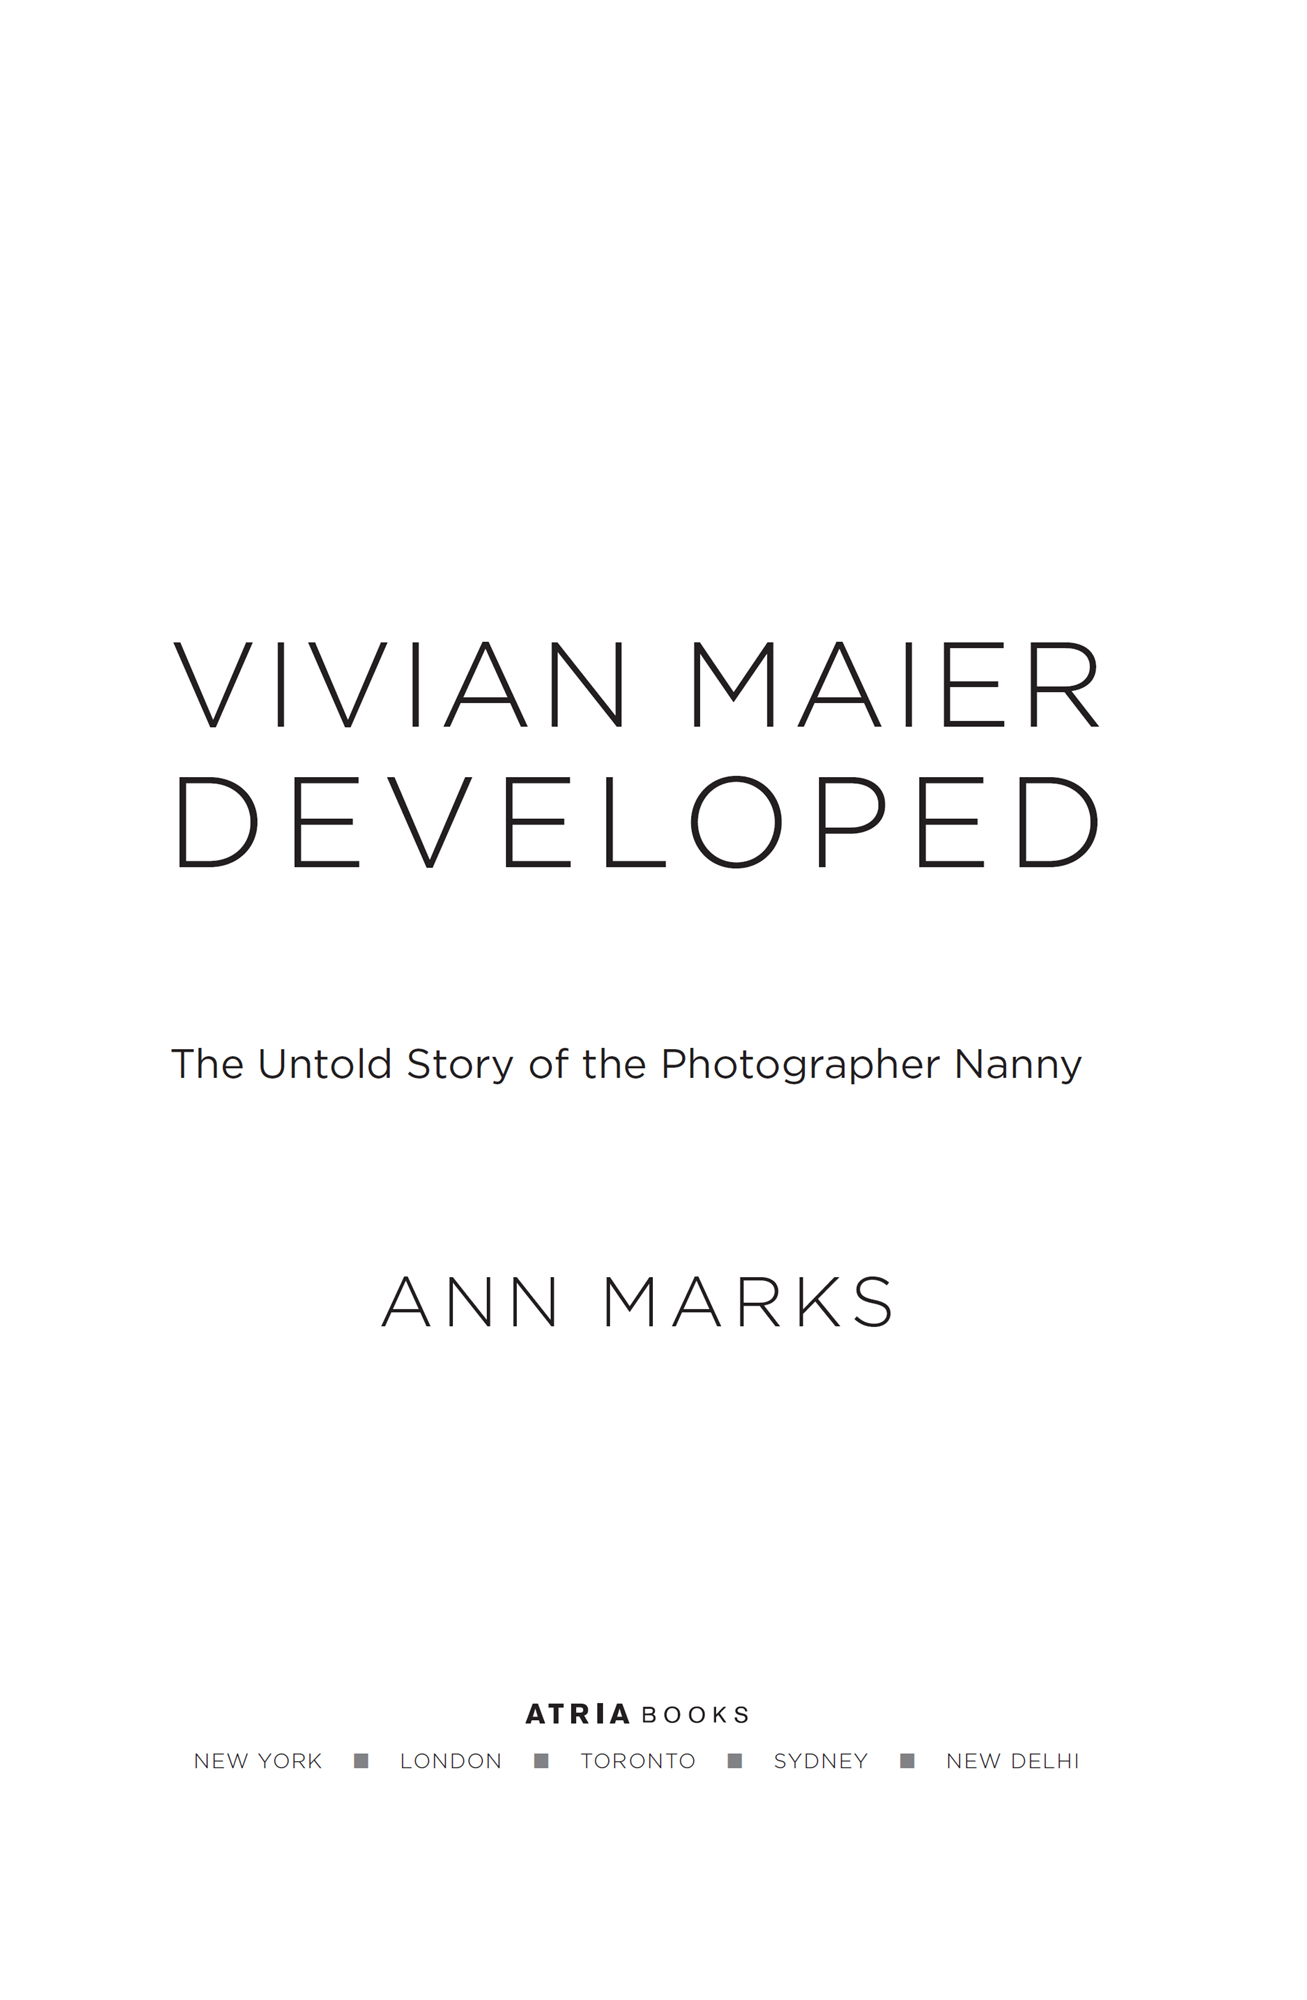 Vivian Maier Developed The Untold Story of the Photographer Nanny - image 2